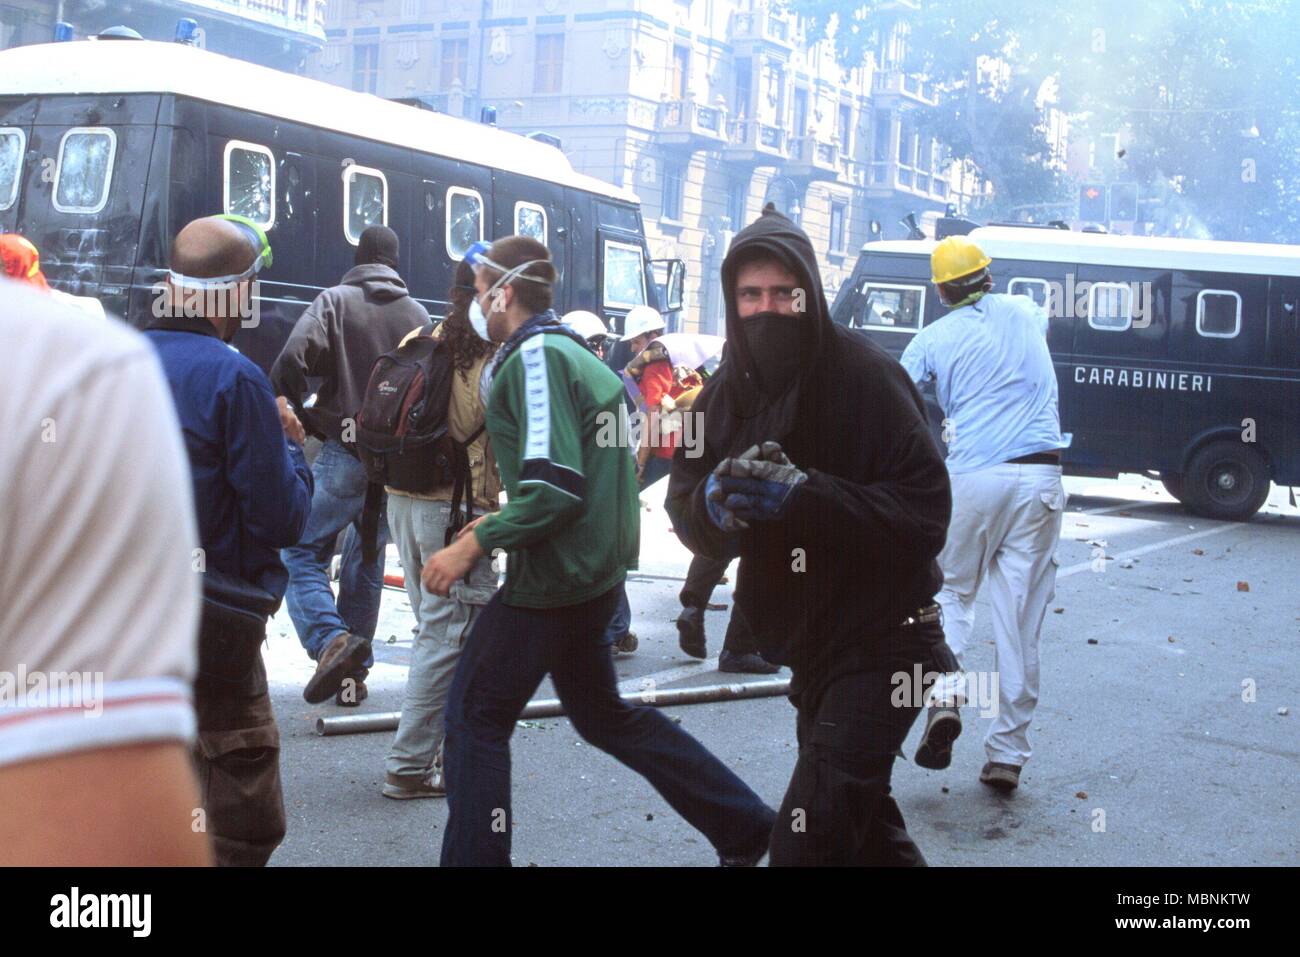 protest against the international G8 summit in Genoa (Italy), July 2001, assault on a Carabinieri van Stock Photo